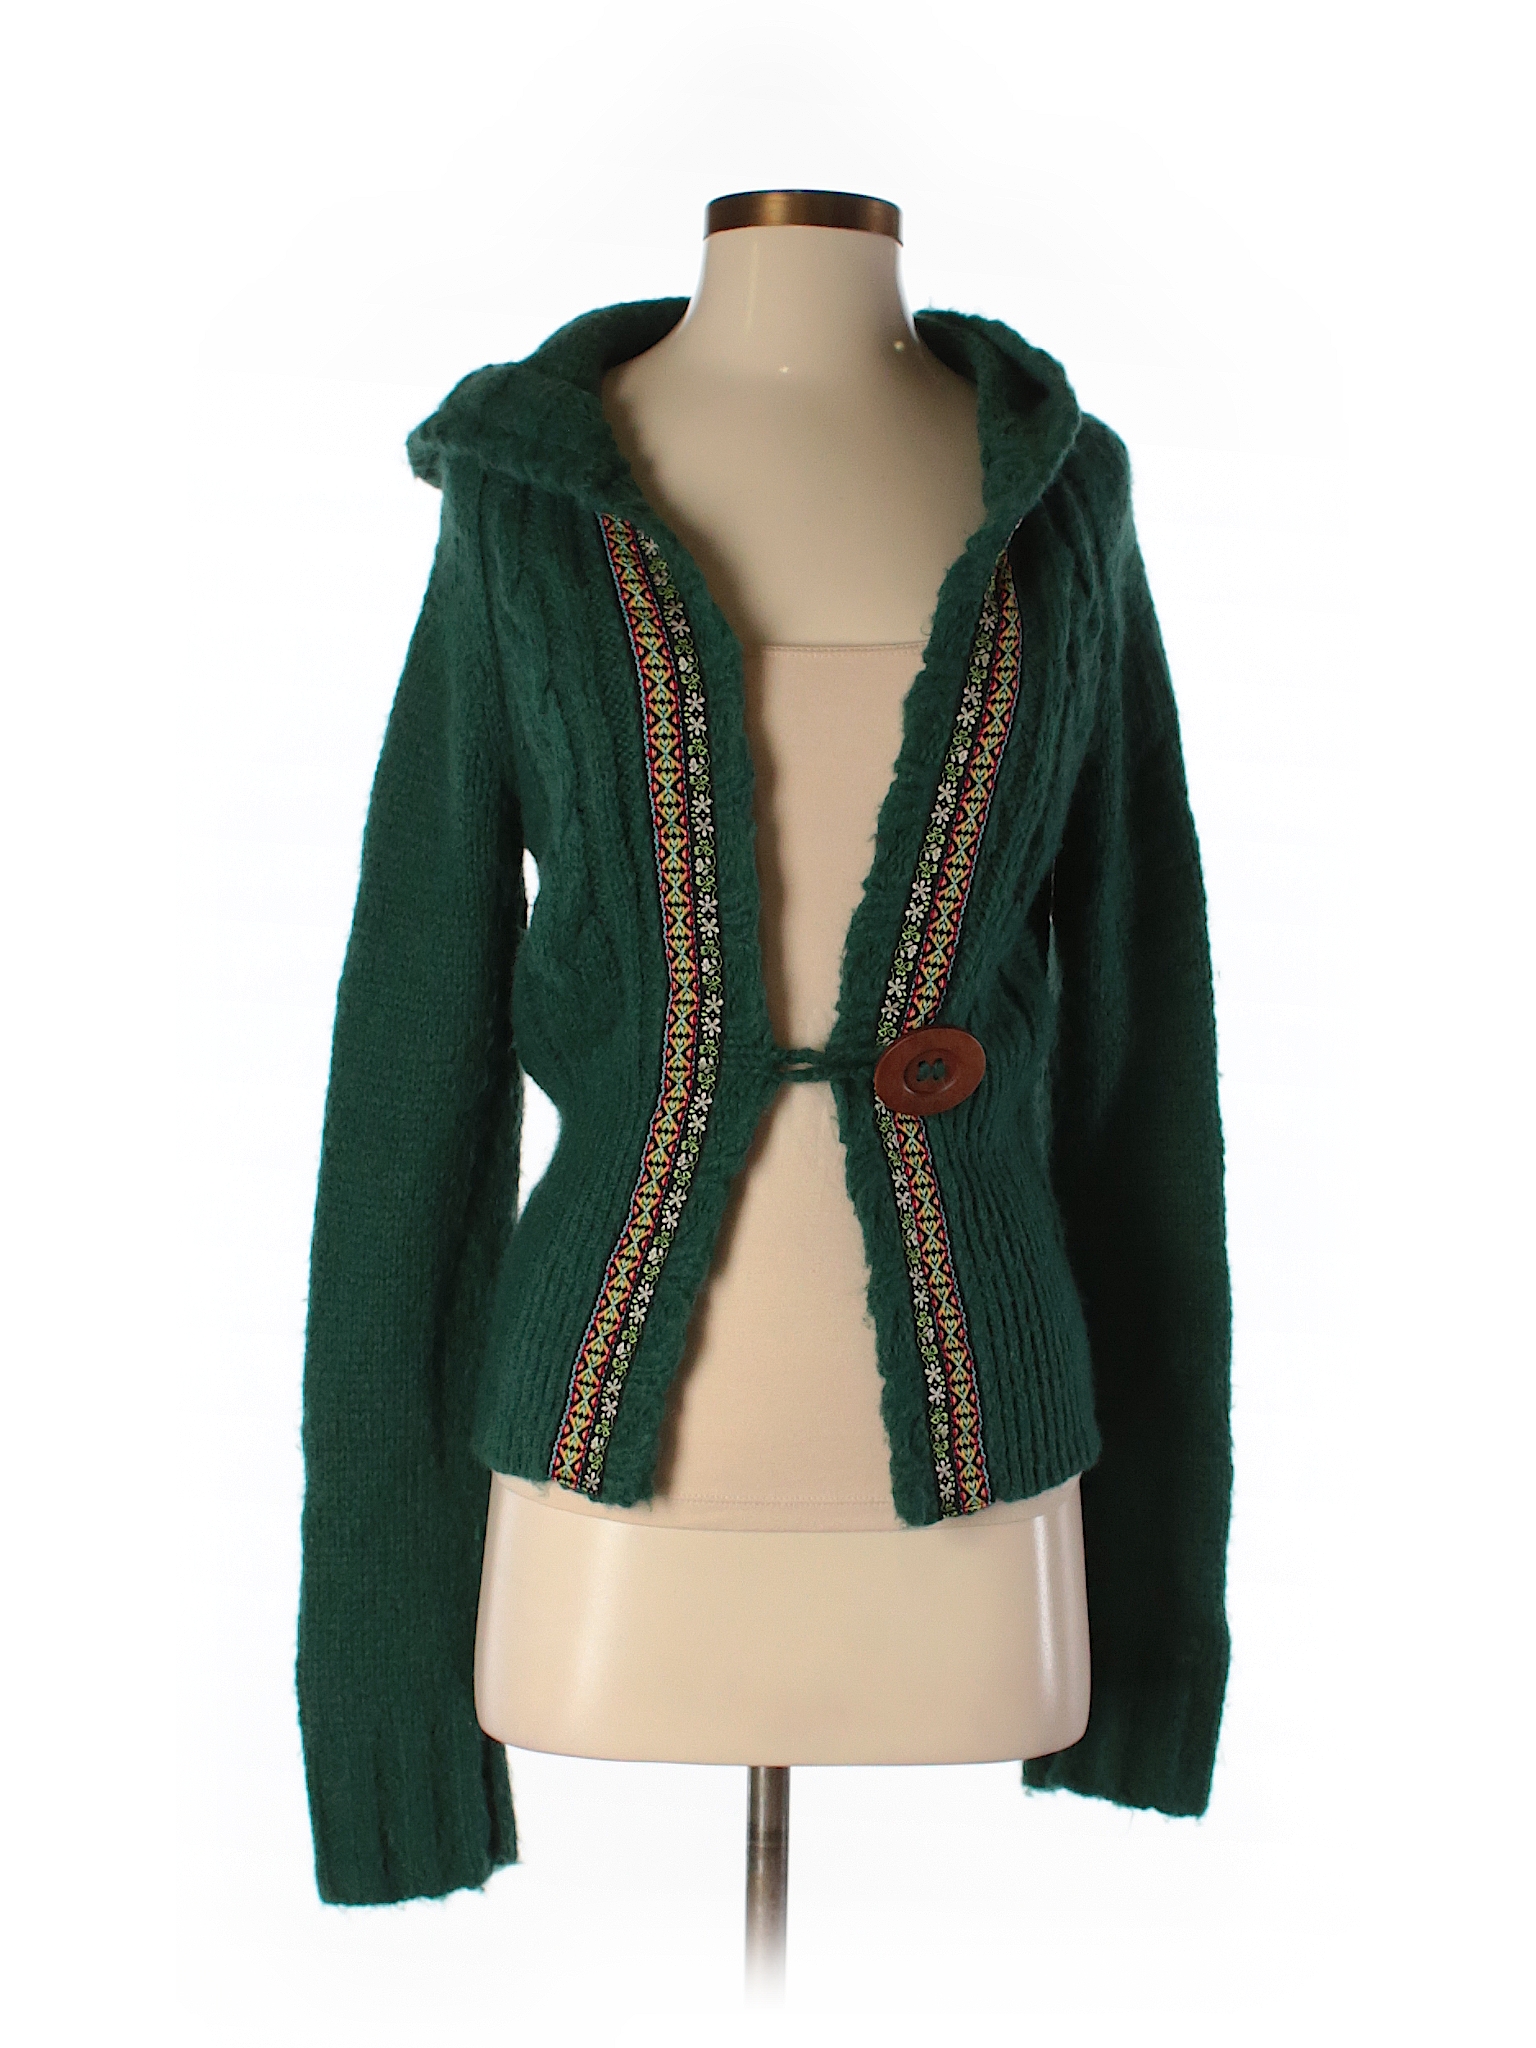 Free People Cardigan - 74% off only on thredUP